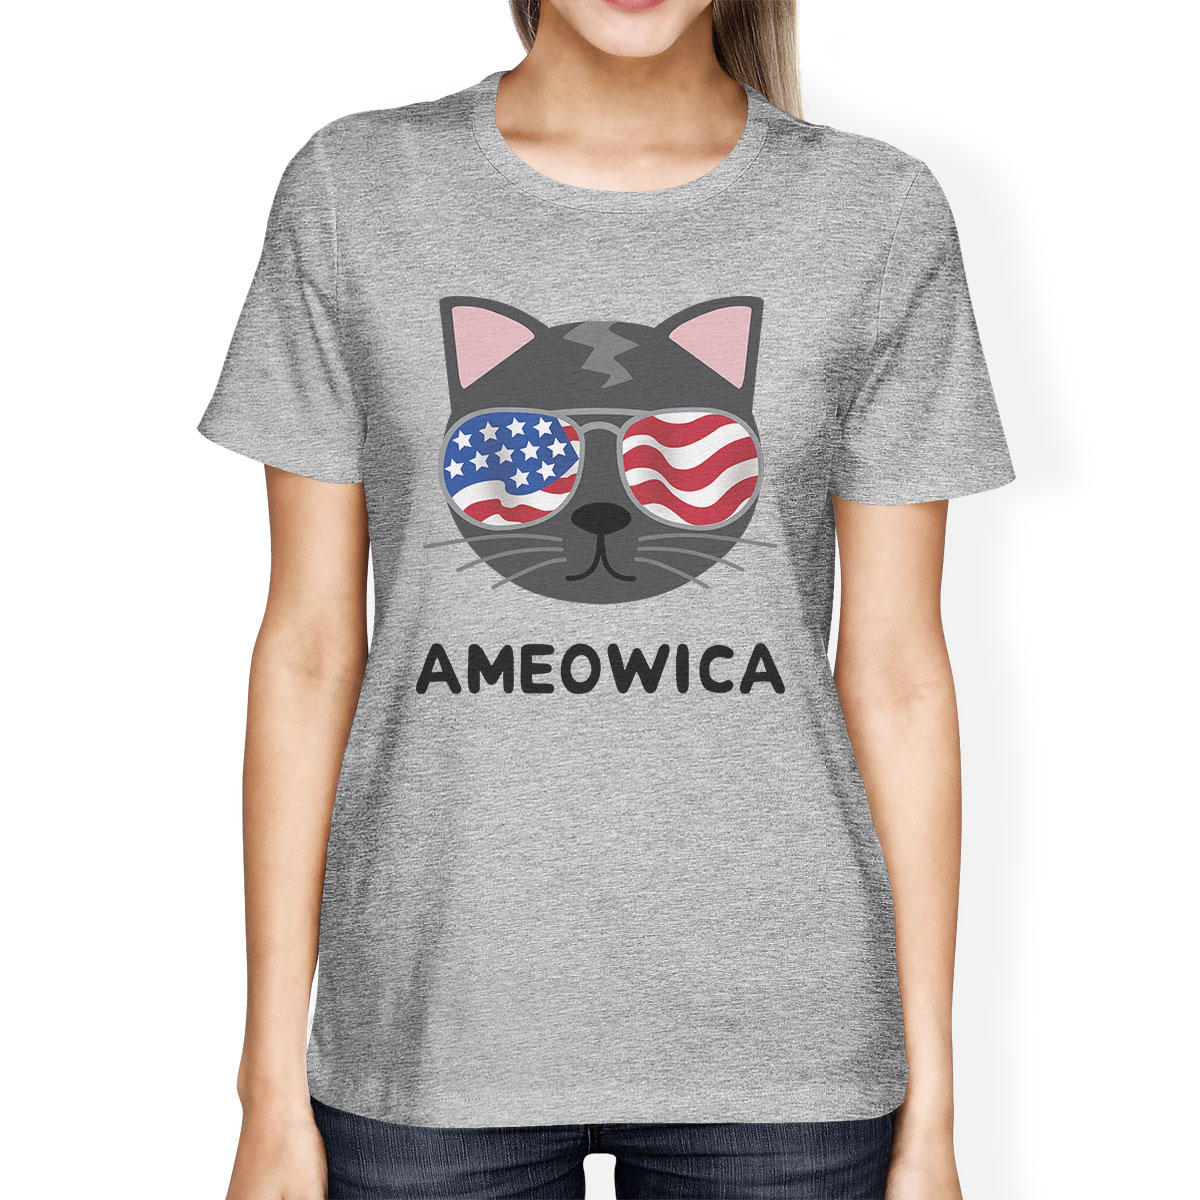 Ameowica Womens Graphic Tee Cute Cat Design Tee For 4th Of July - image 1 of 4